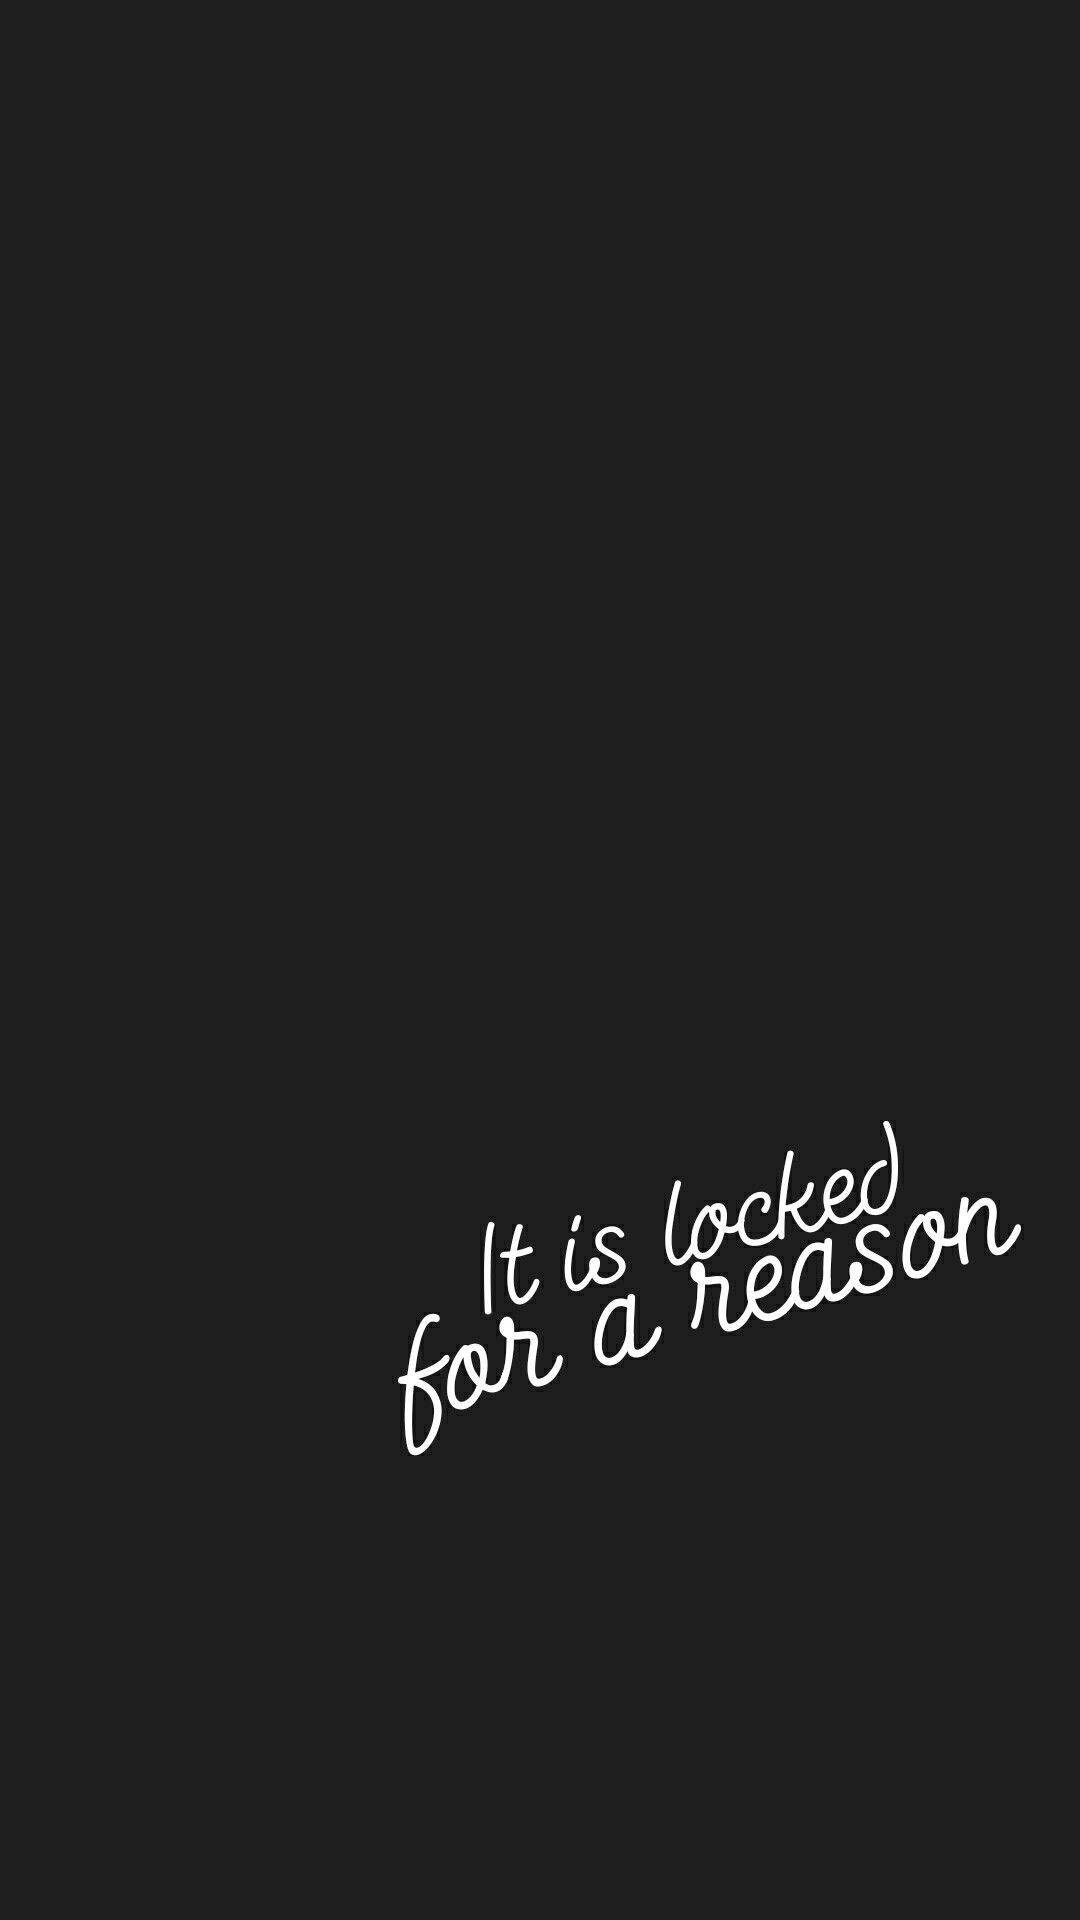 Cute Styled Text Black Phone Background